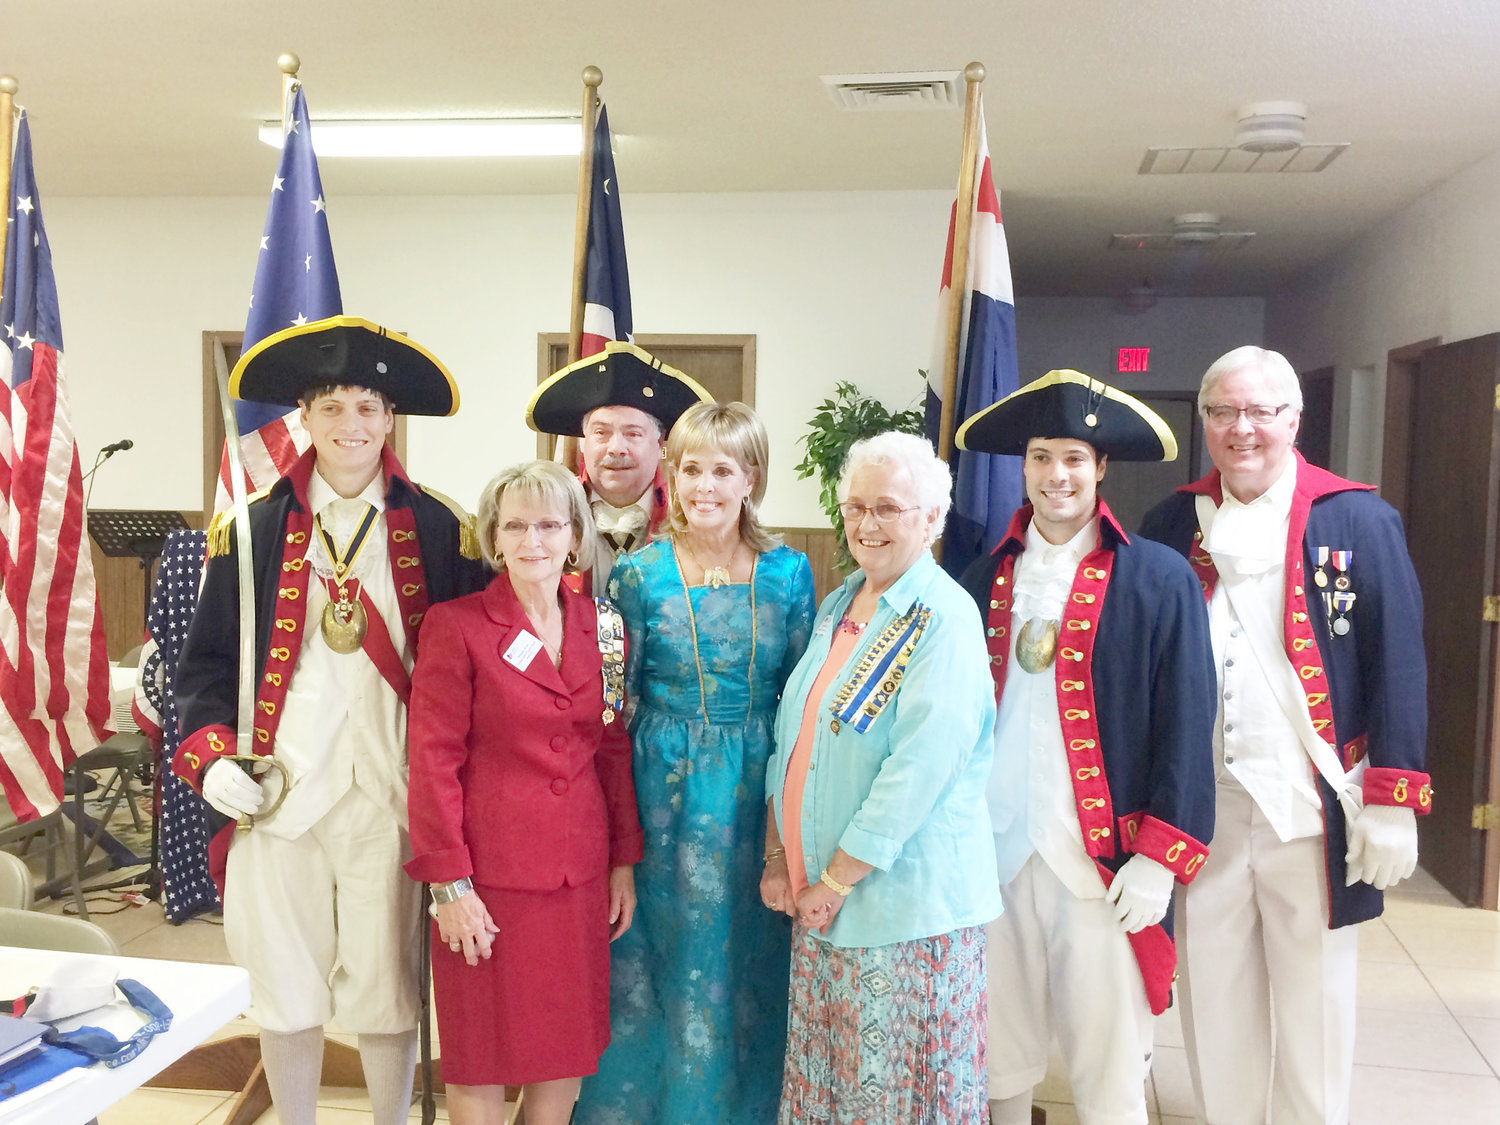 From left are Matthew Lee, Susan Few, Stephen Lee, Anna Lee, Lucille Gilbreath, Britton Lee and Rev. Don Majors.